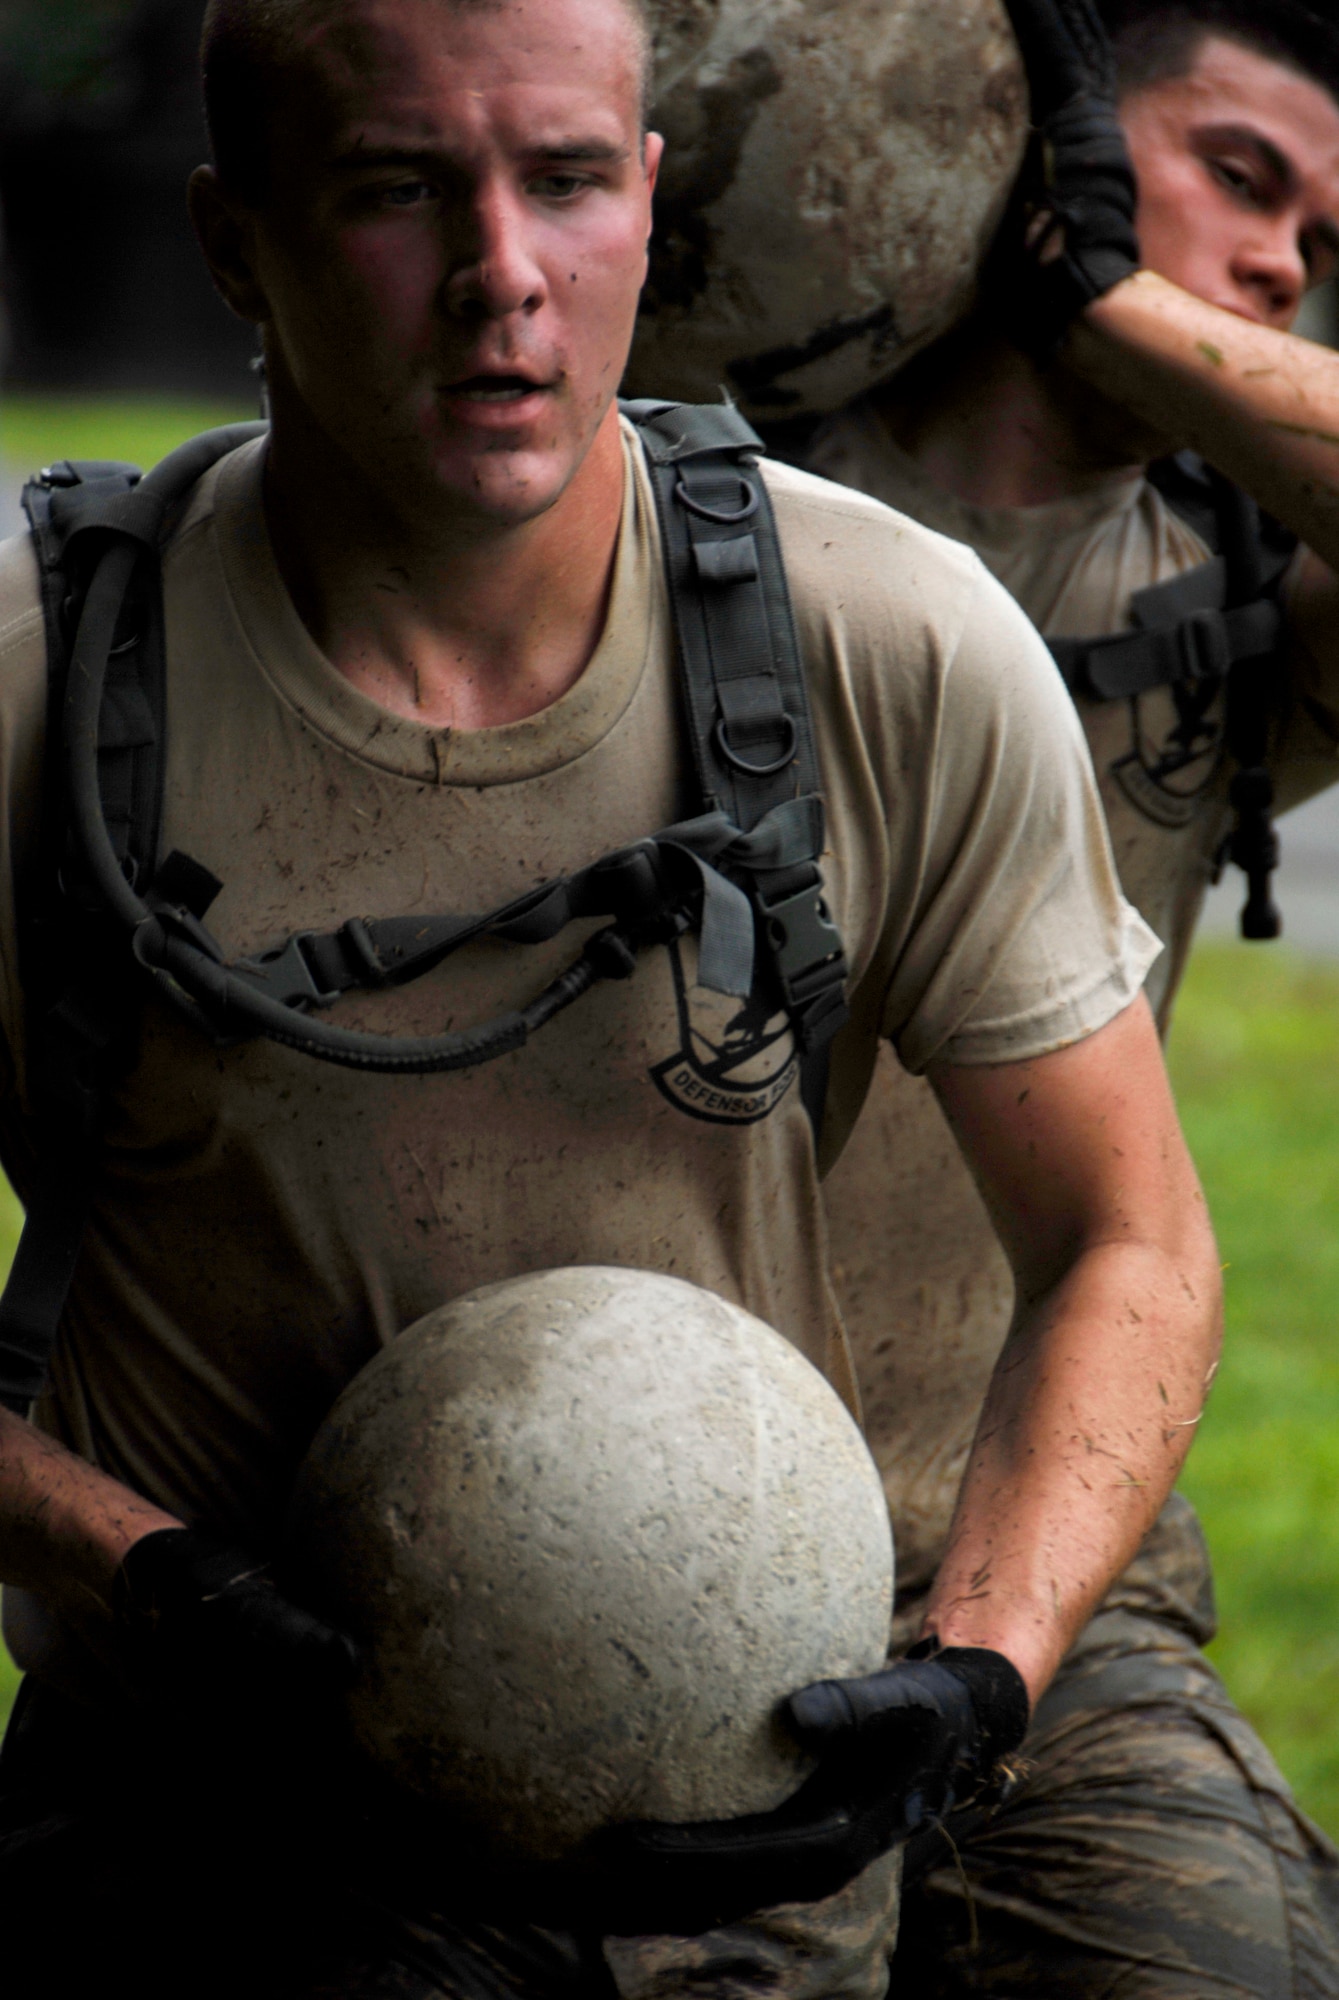 Staff Sgt. Aaron Jerolmon, assigned to the 103rd Security Forces Squadron, carries a weighted ball during the PT portion of the Connecticut SWAT Challenge in West Harford, Conn., Aug. 23, 2012. The Air Guard team took top military team honors for the seventh straight year, fourth in the PT portion and 12th place overall in the annual competition. (U.S. Air Force photo by Senior Airman Jennifer Pierce/Released)